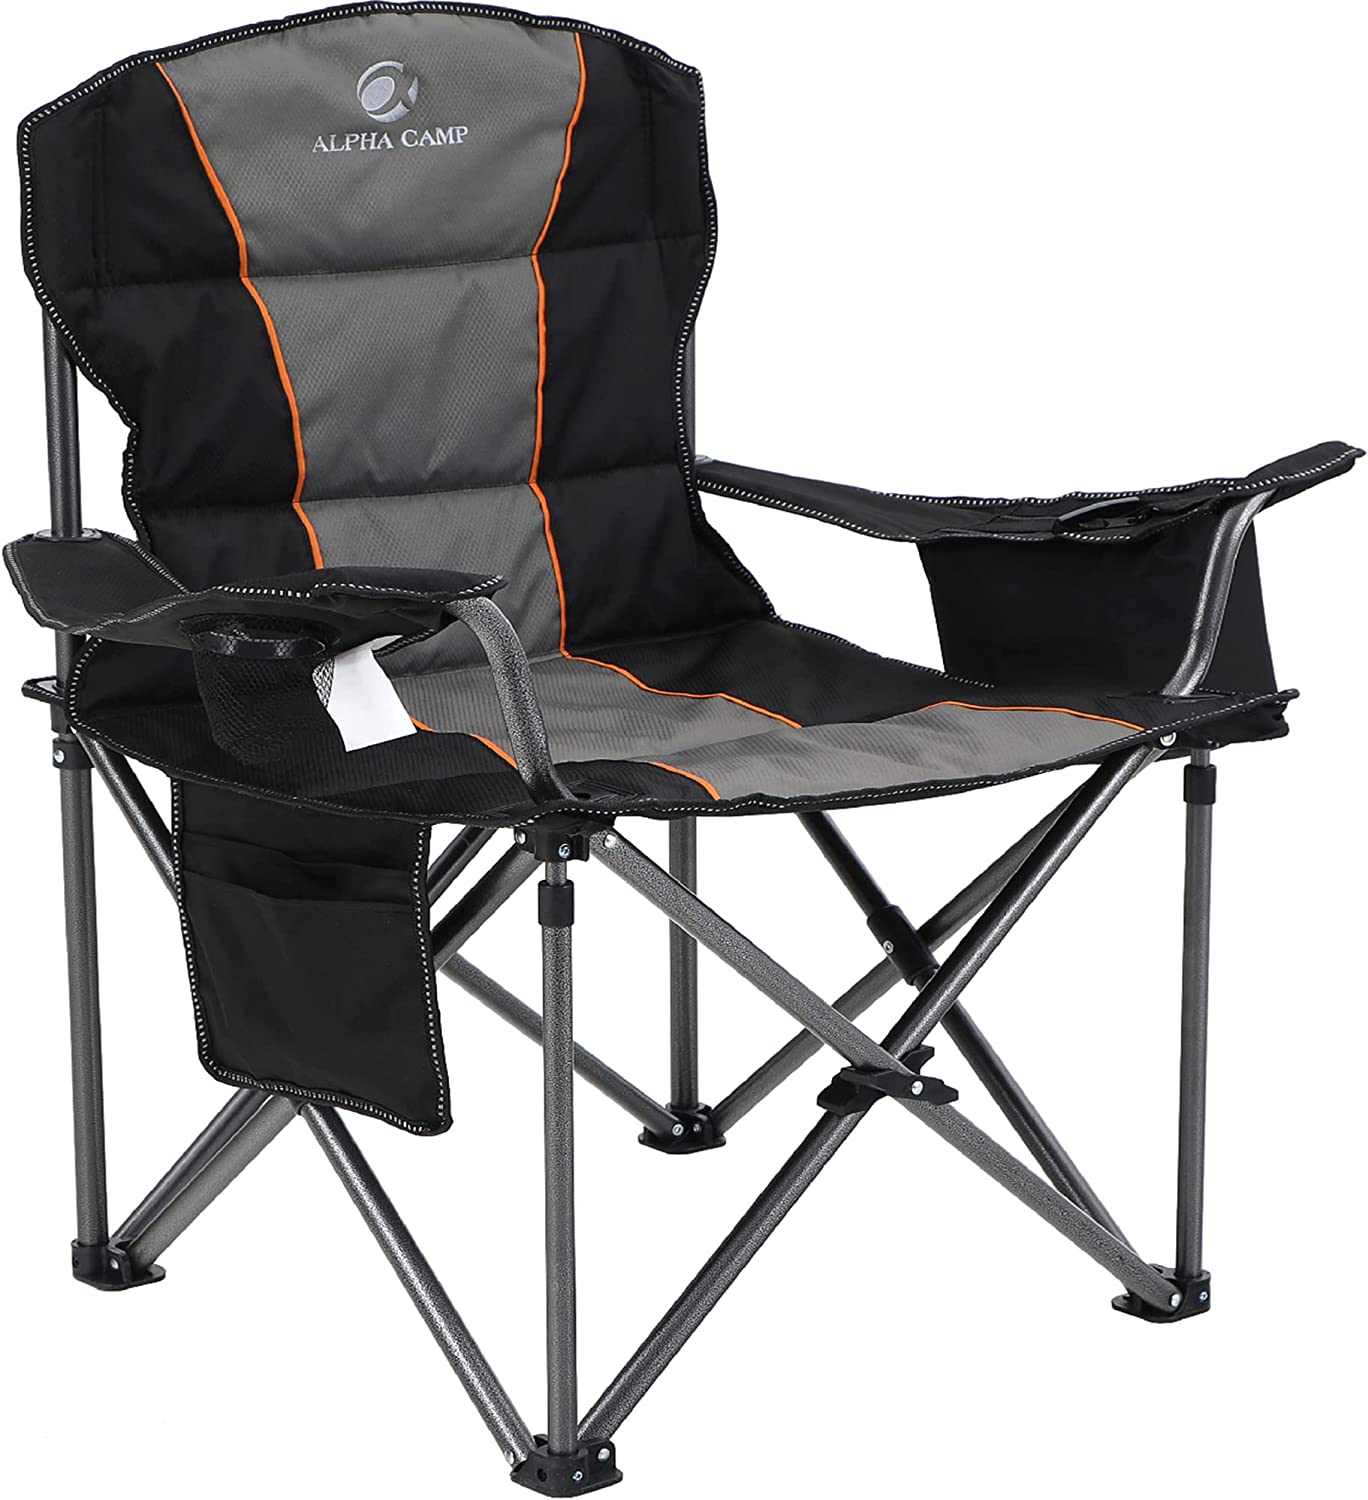 Alpha Camp Oversized Heavy-Duty Camping Chair